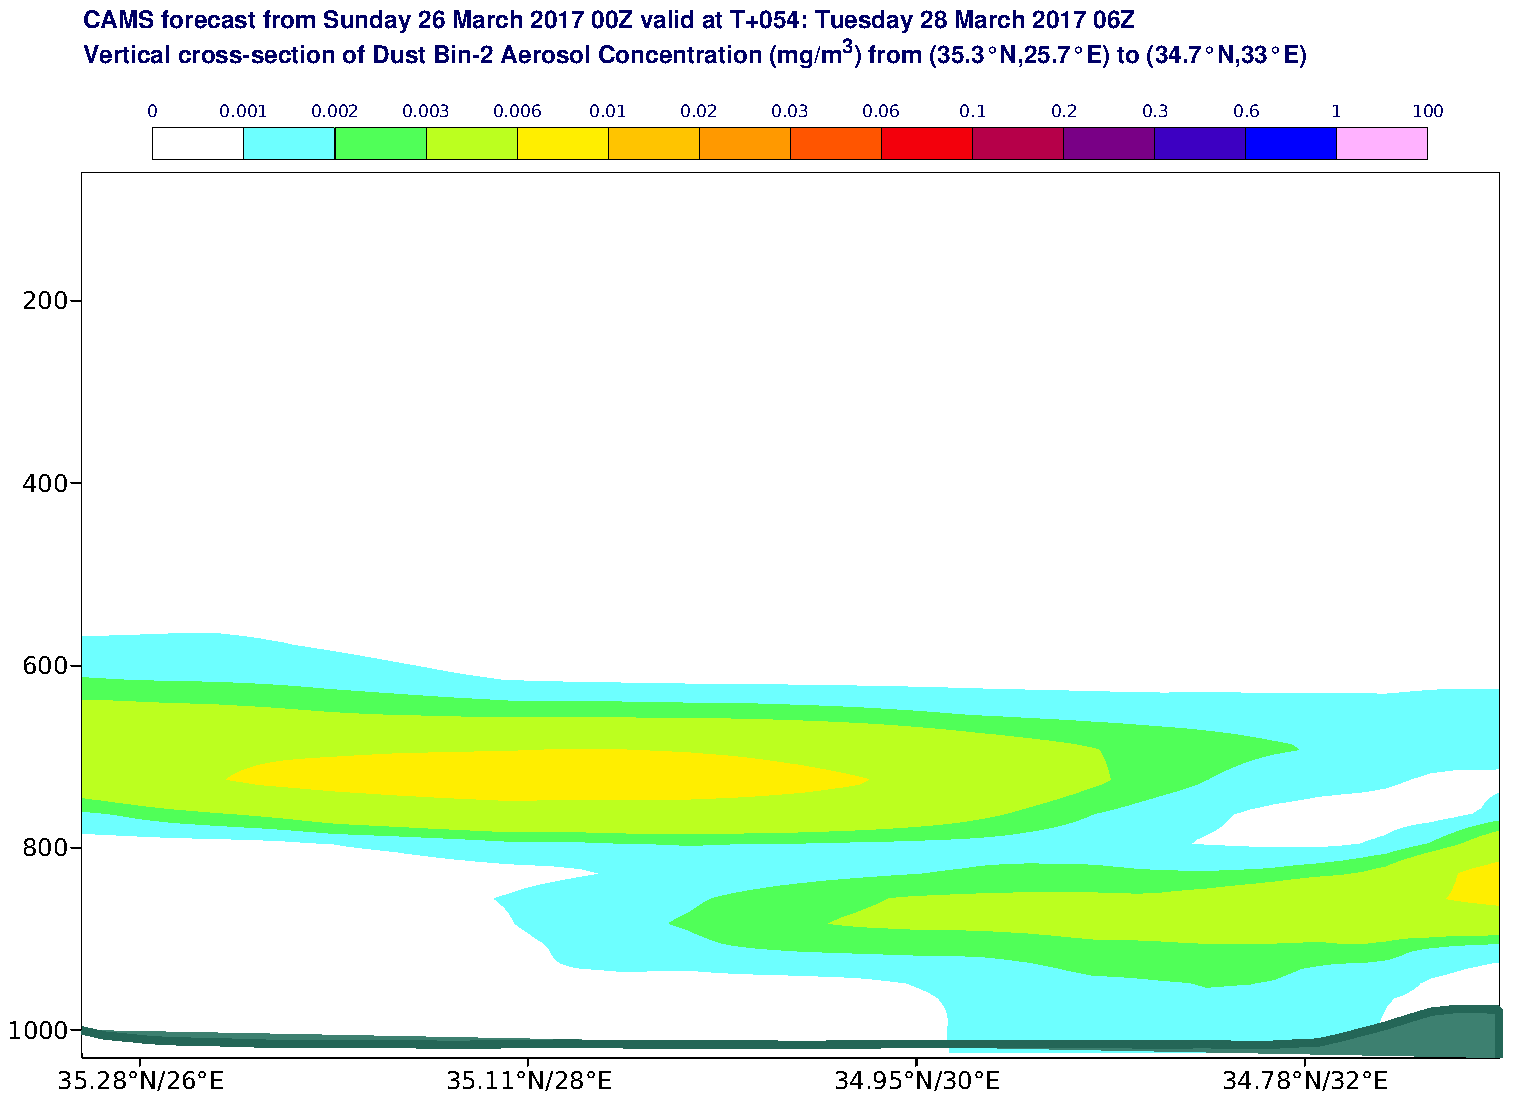 Vertical cross-section of Dust Bin-2 Aerosol Concentration (mg/m3) valid at T54 - 2017-03-28 06:00